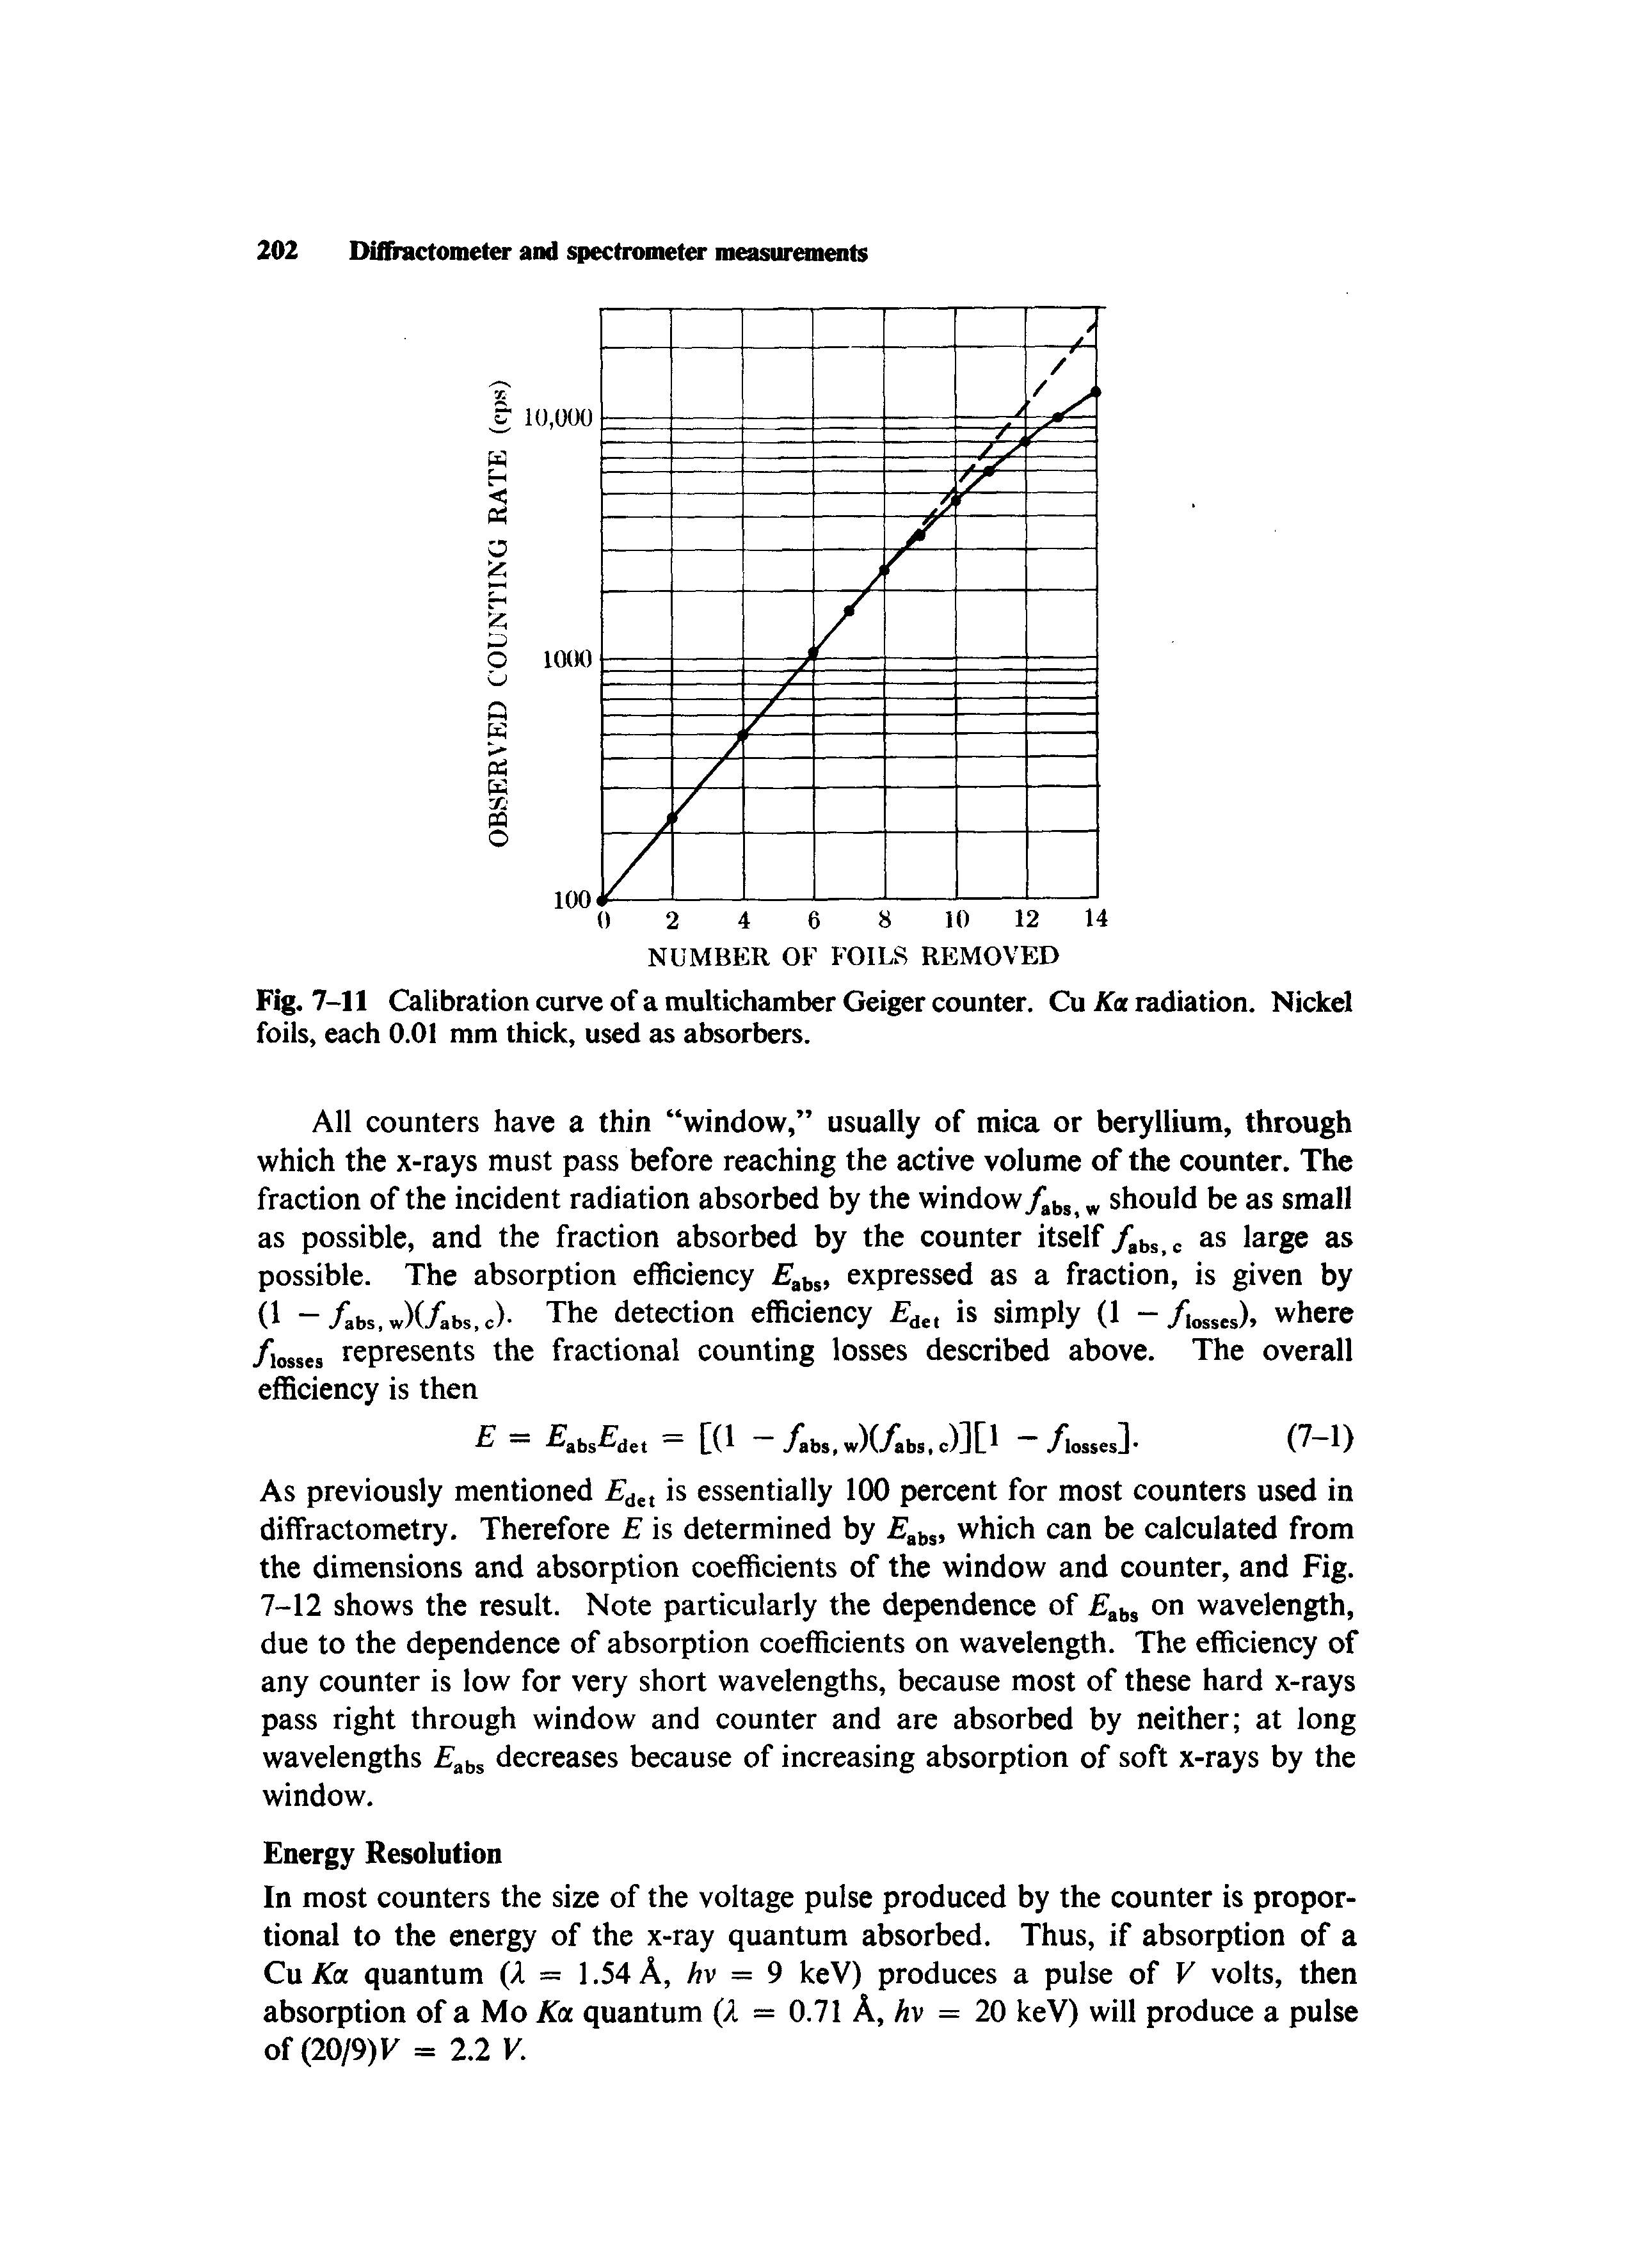 Fig. 7-11 Calibration curve of a multichamber Geiger counter. Cu Ka radiation. Nickel foils, each 0.01 mm thick, used as absorbers.